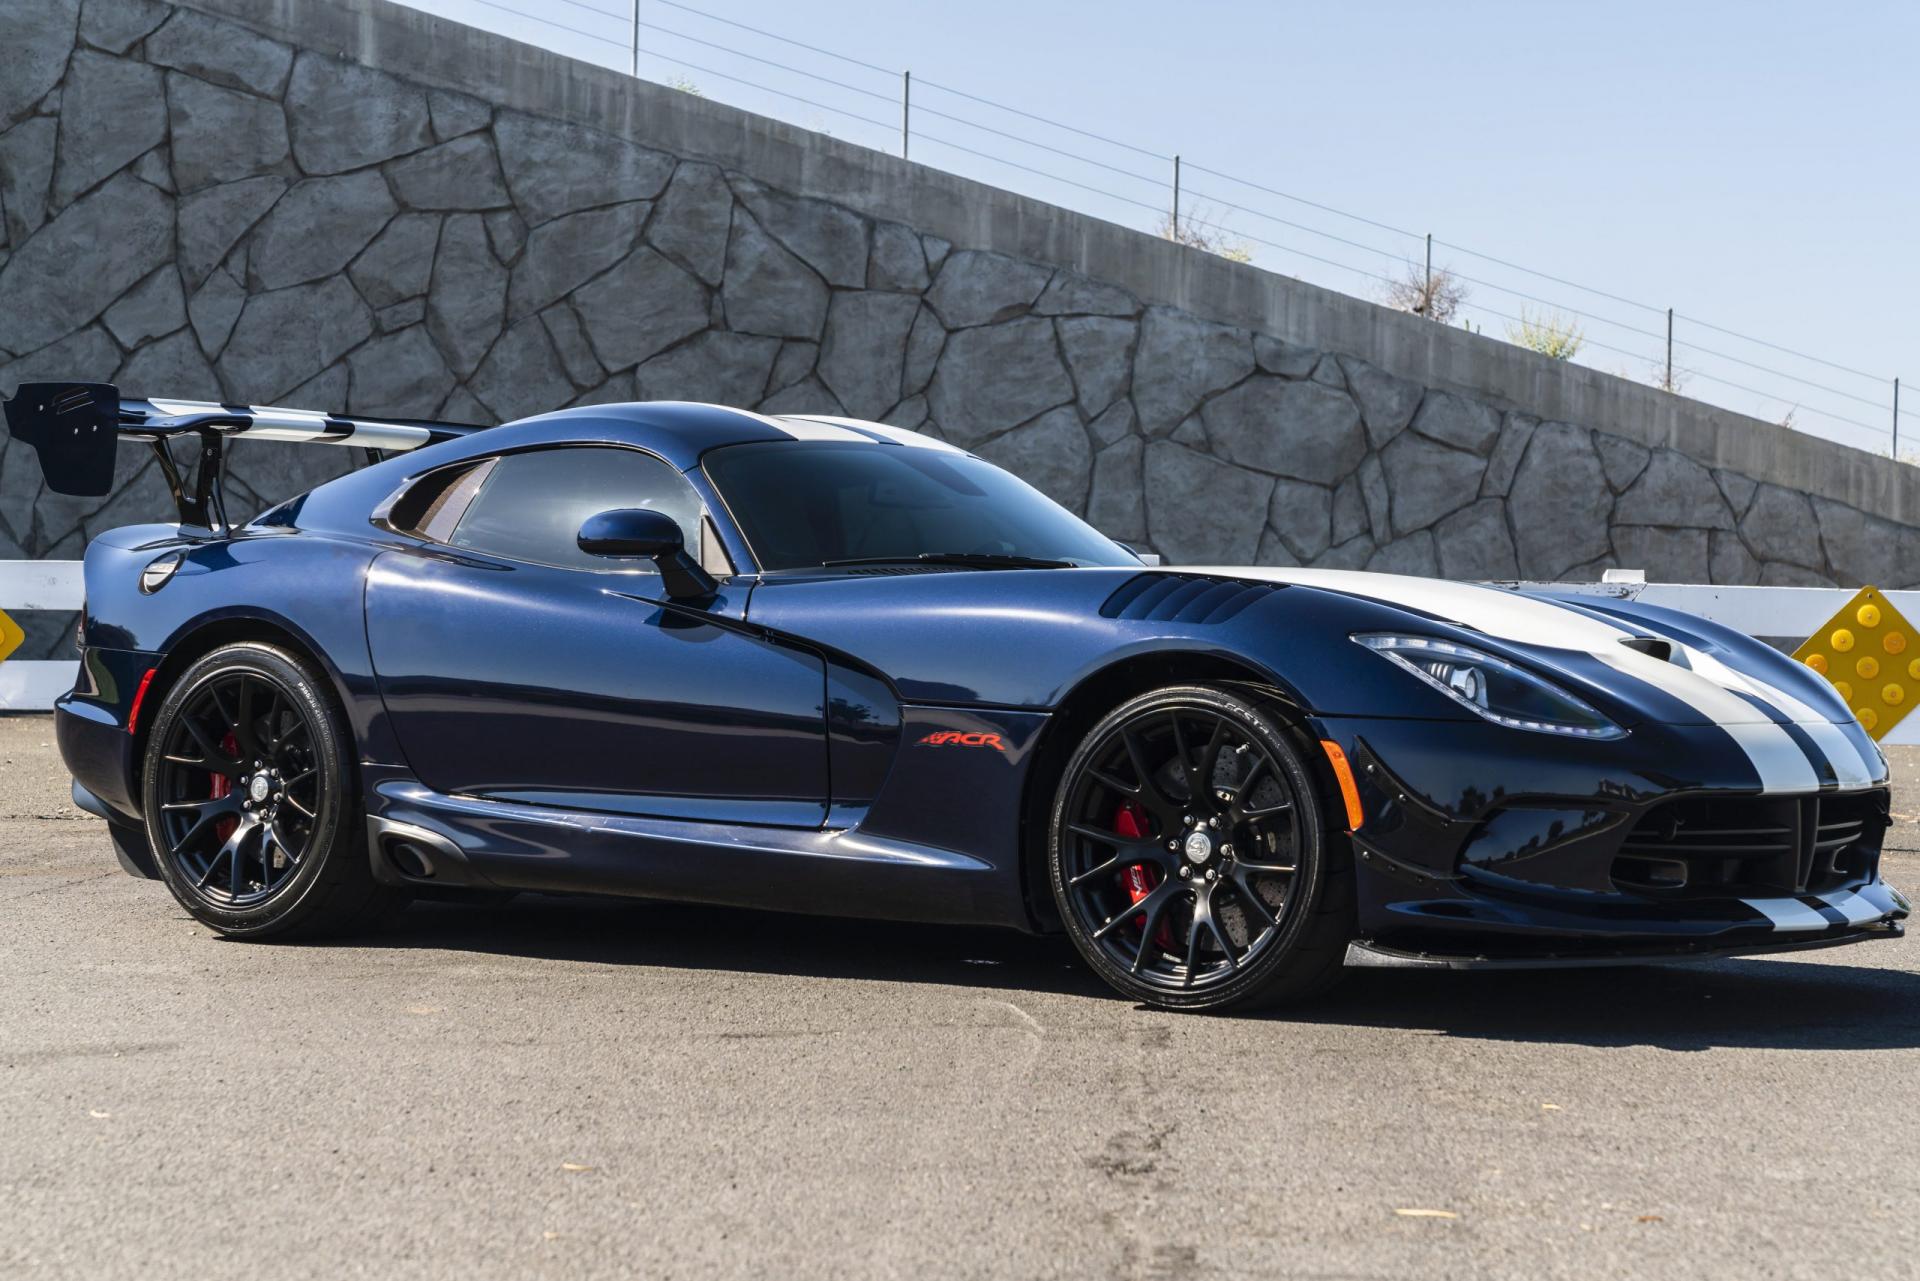 Used 16 Dodge Viper Acr For Sale Sold West Coast Exotic Cars Stock C11